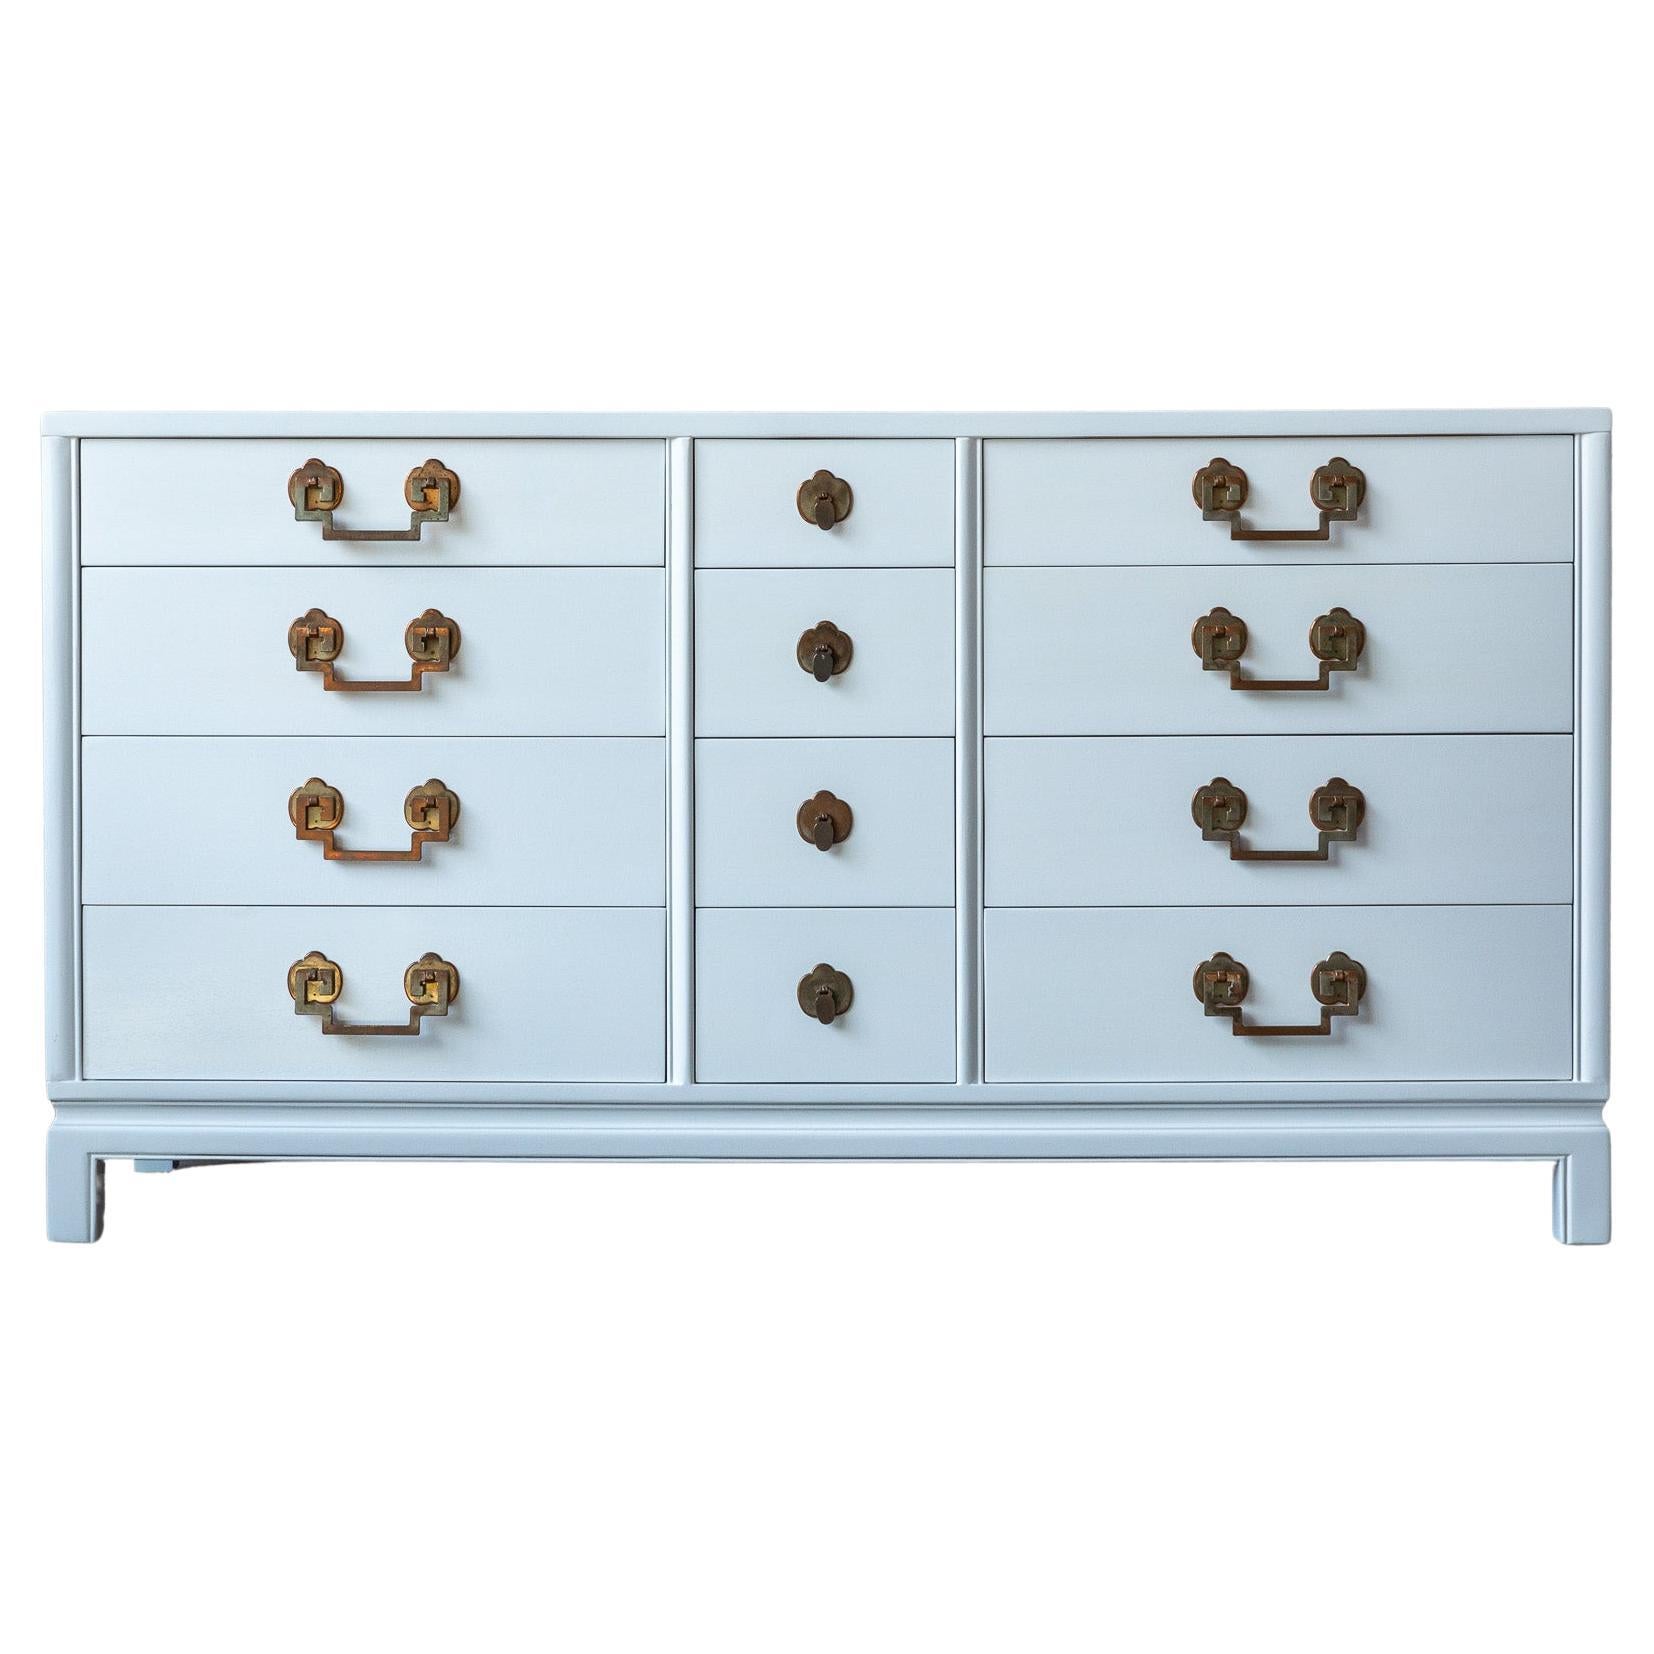 Midcentury Off-White Lacquered Landstrom 12 Drawer Dresser with Copper Pulls For Sale